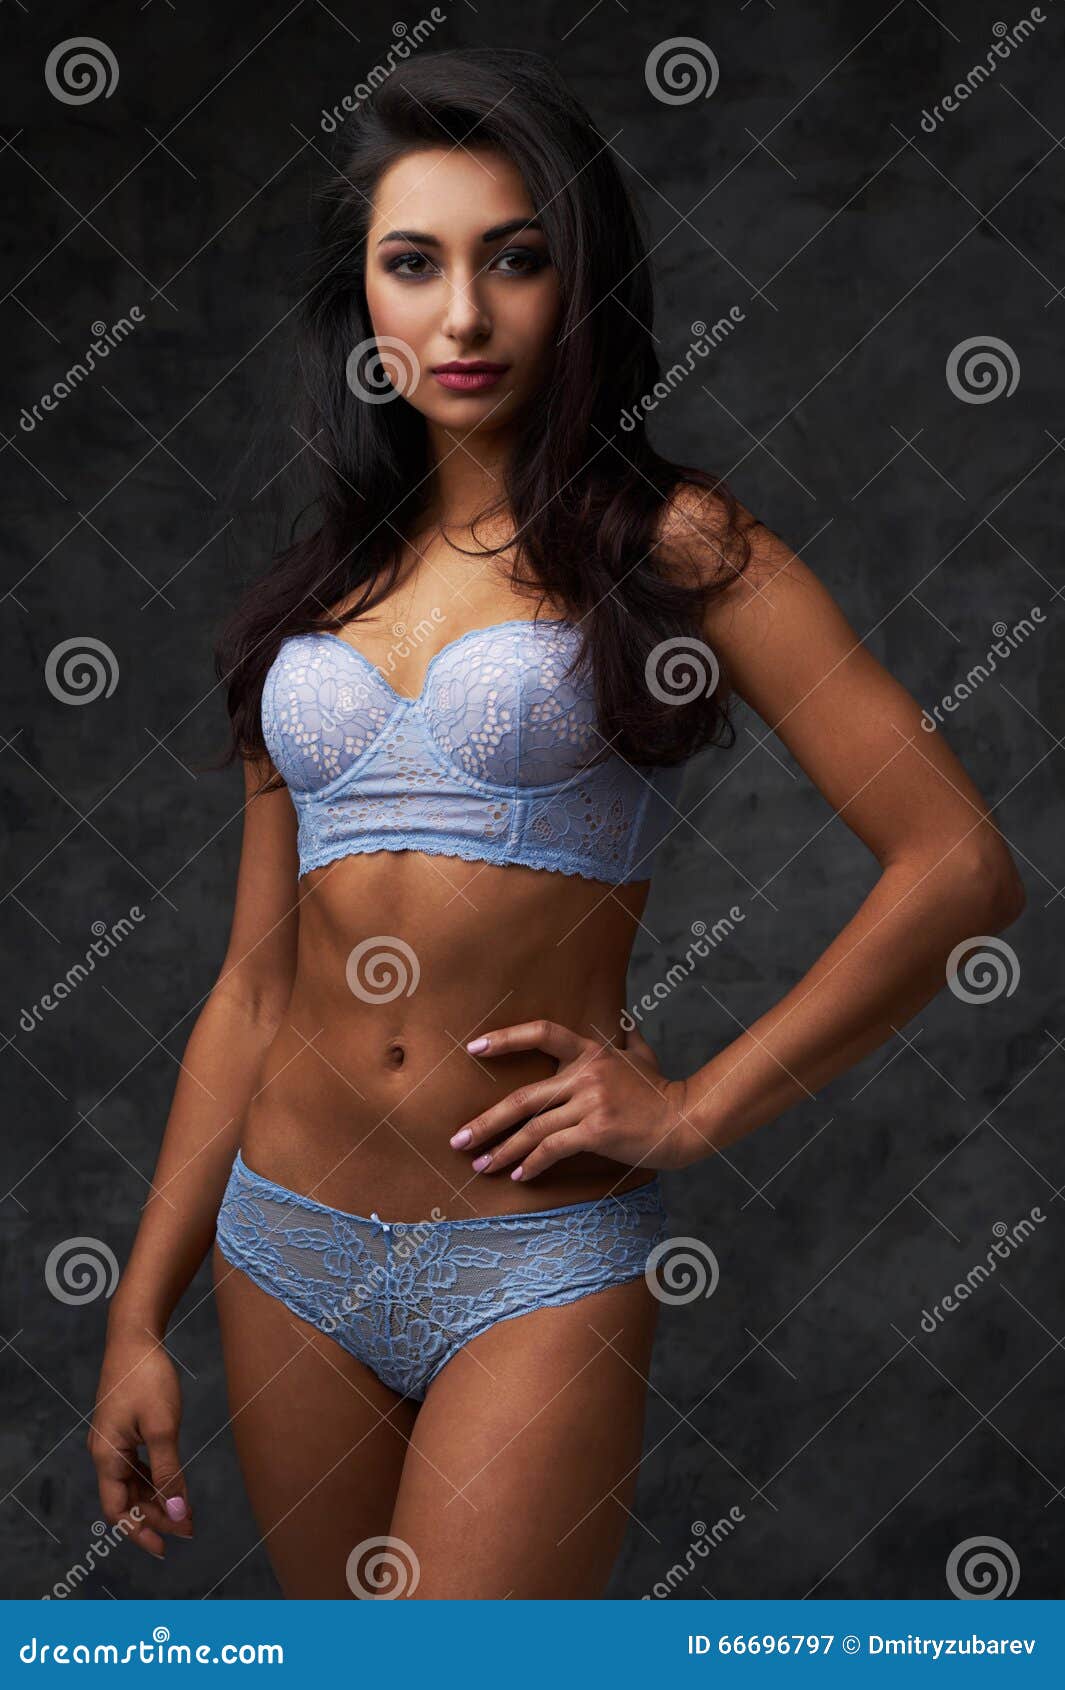 Beautiful Indian Lady in Blue Lingerie Stock Image - Image of brunette,  expression: 66696797